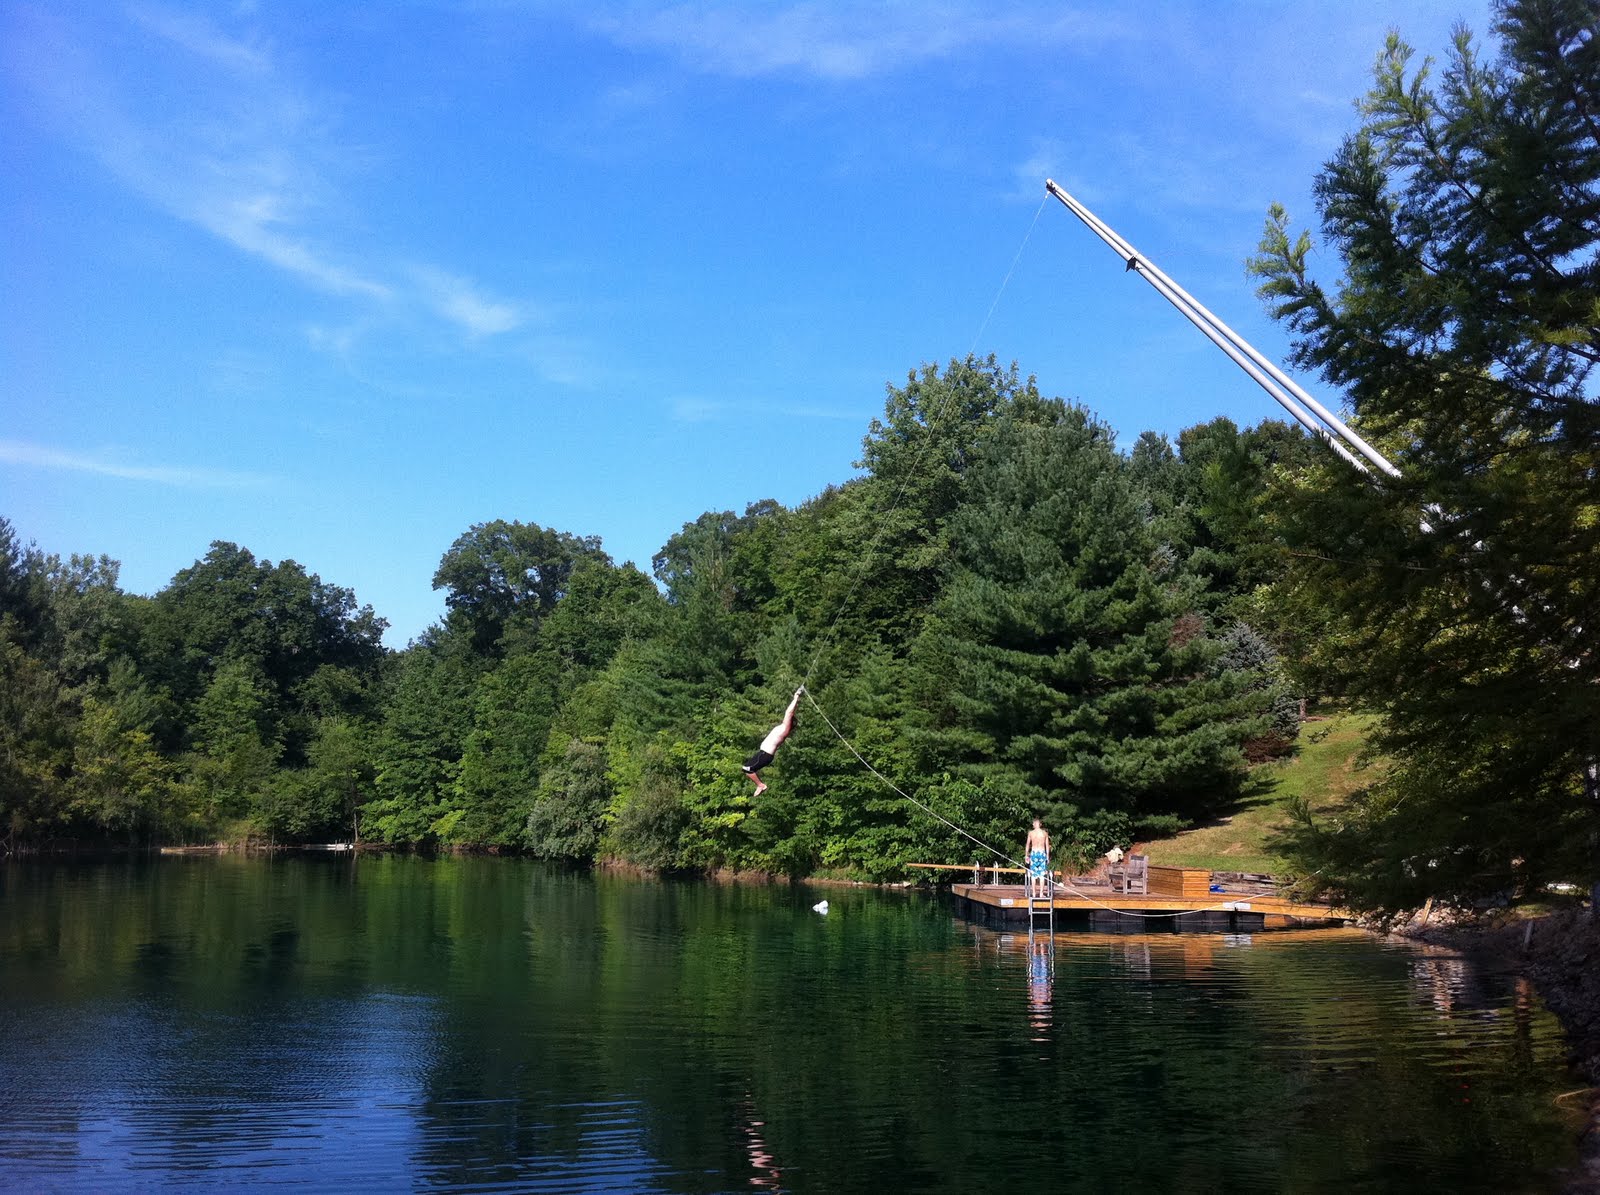 Nate's Fishing Blog: Perfect Pond Rope Swing